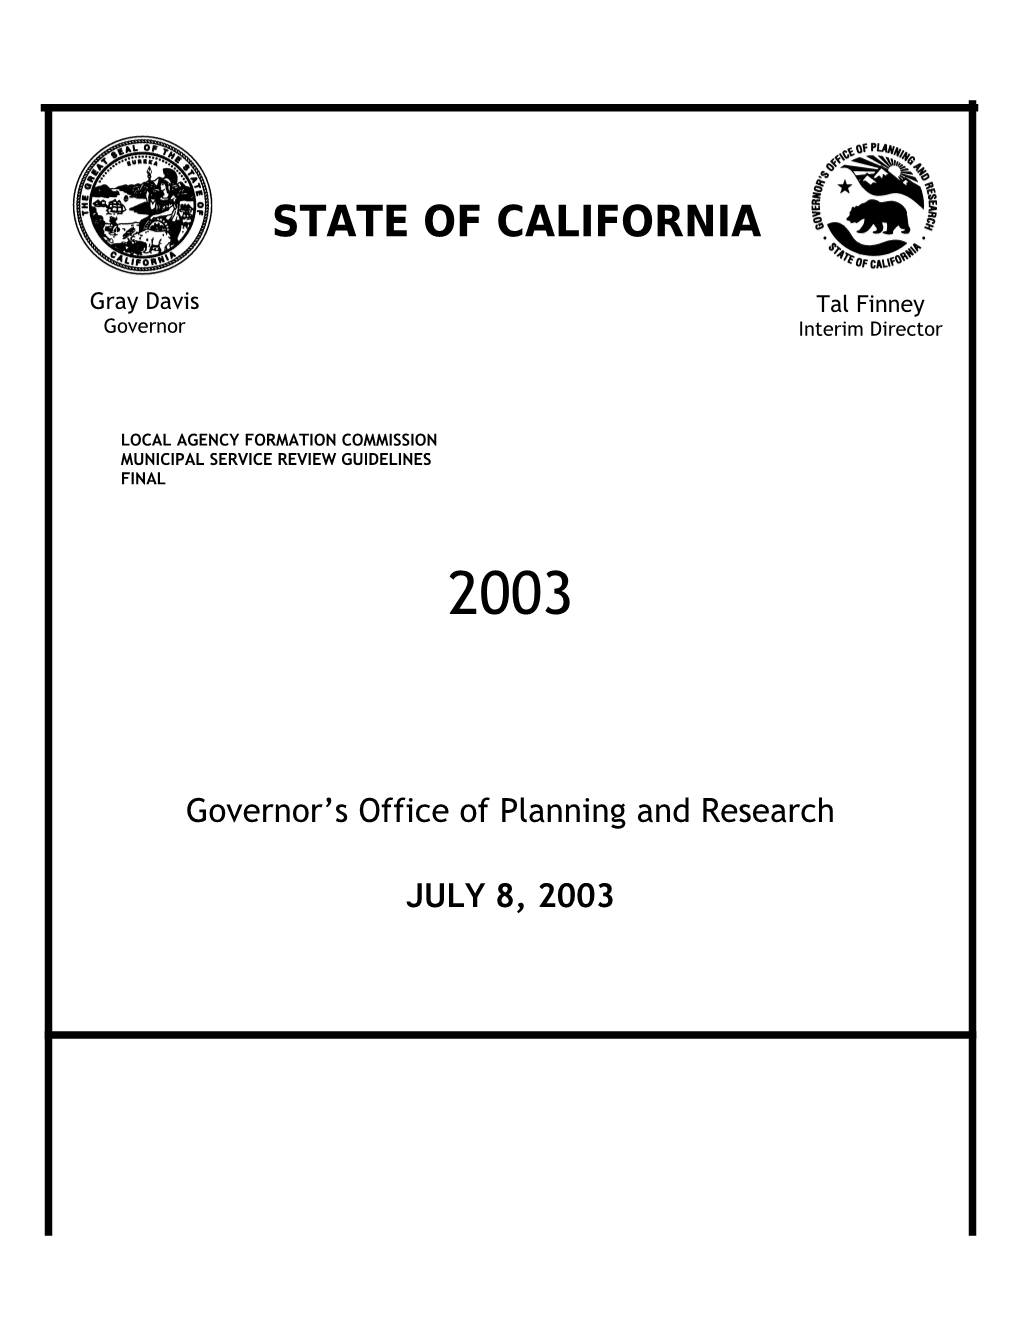 Governor S Office of Planning and Research